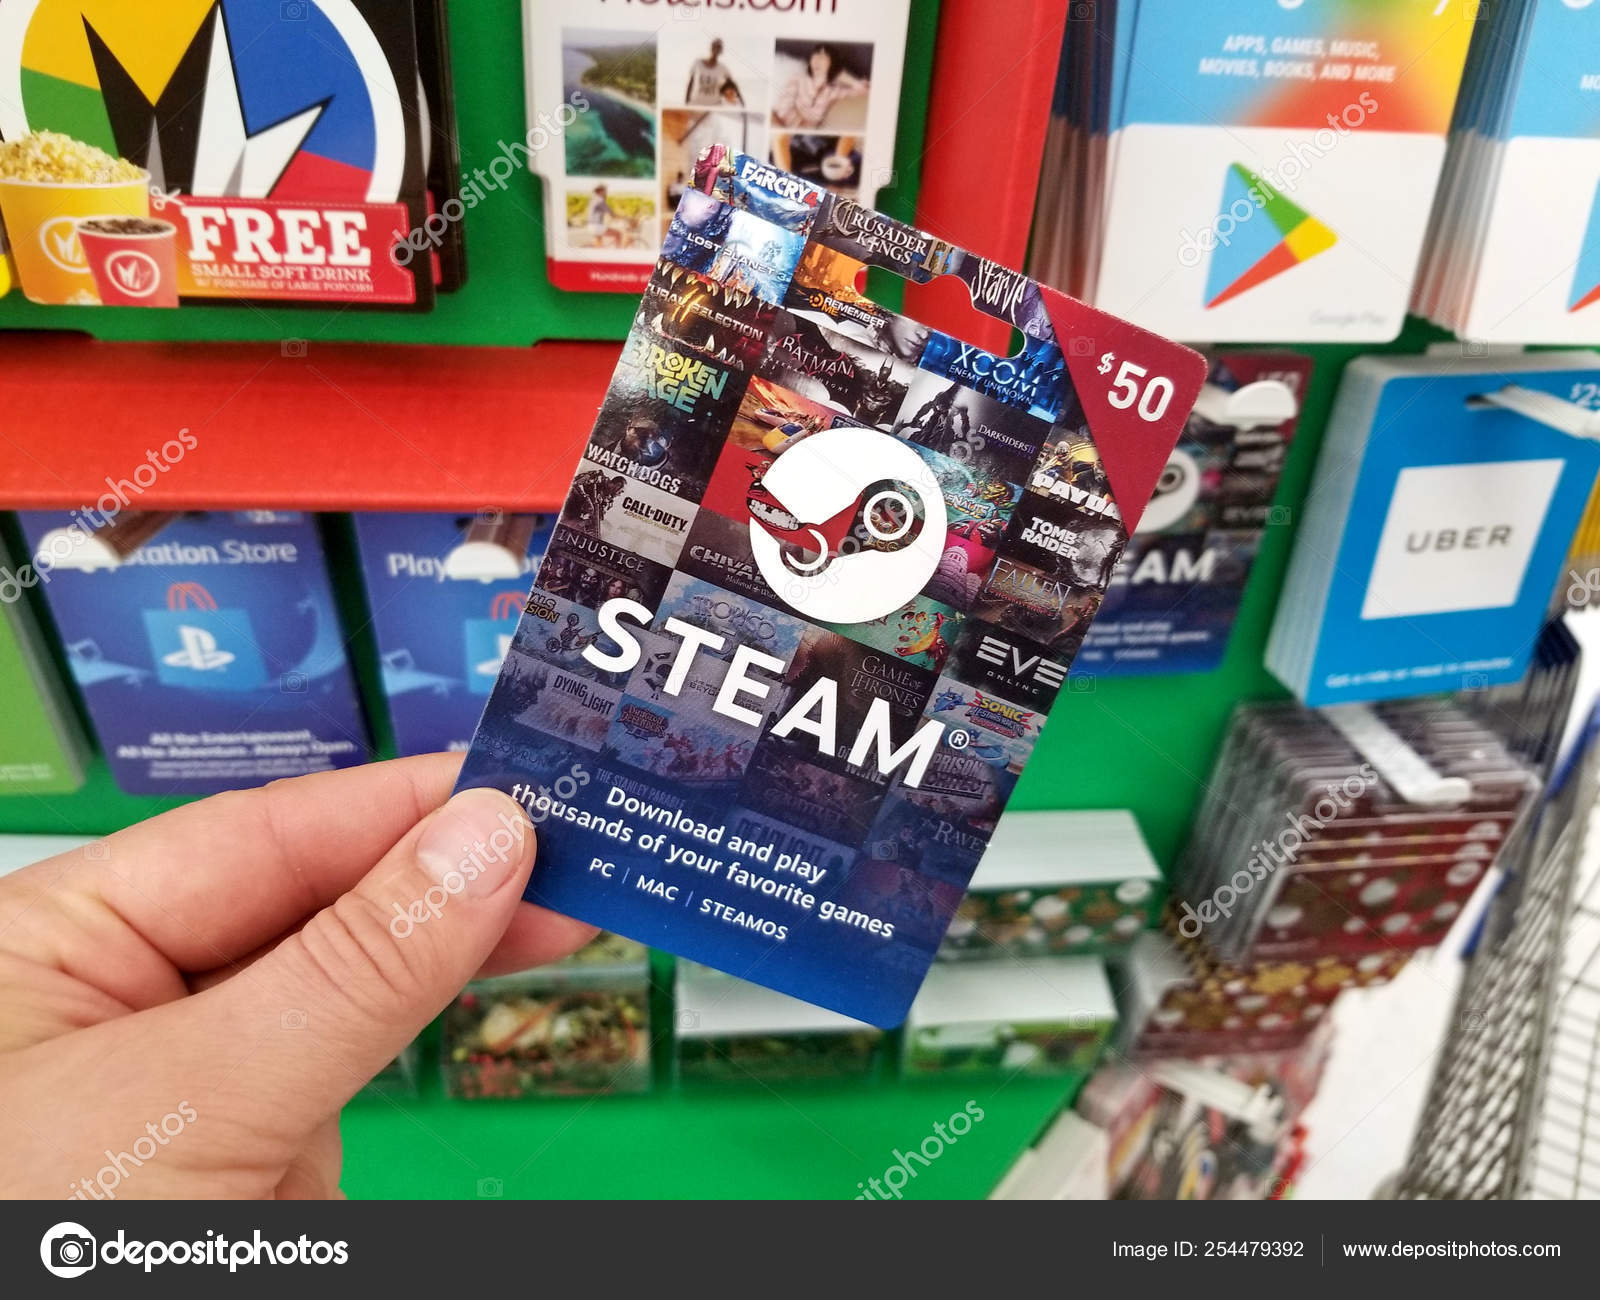 Steam Gift Card In A Hand Stock Editorial Photo C Dennizn 254479392 - roblox gift card walmart in store